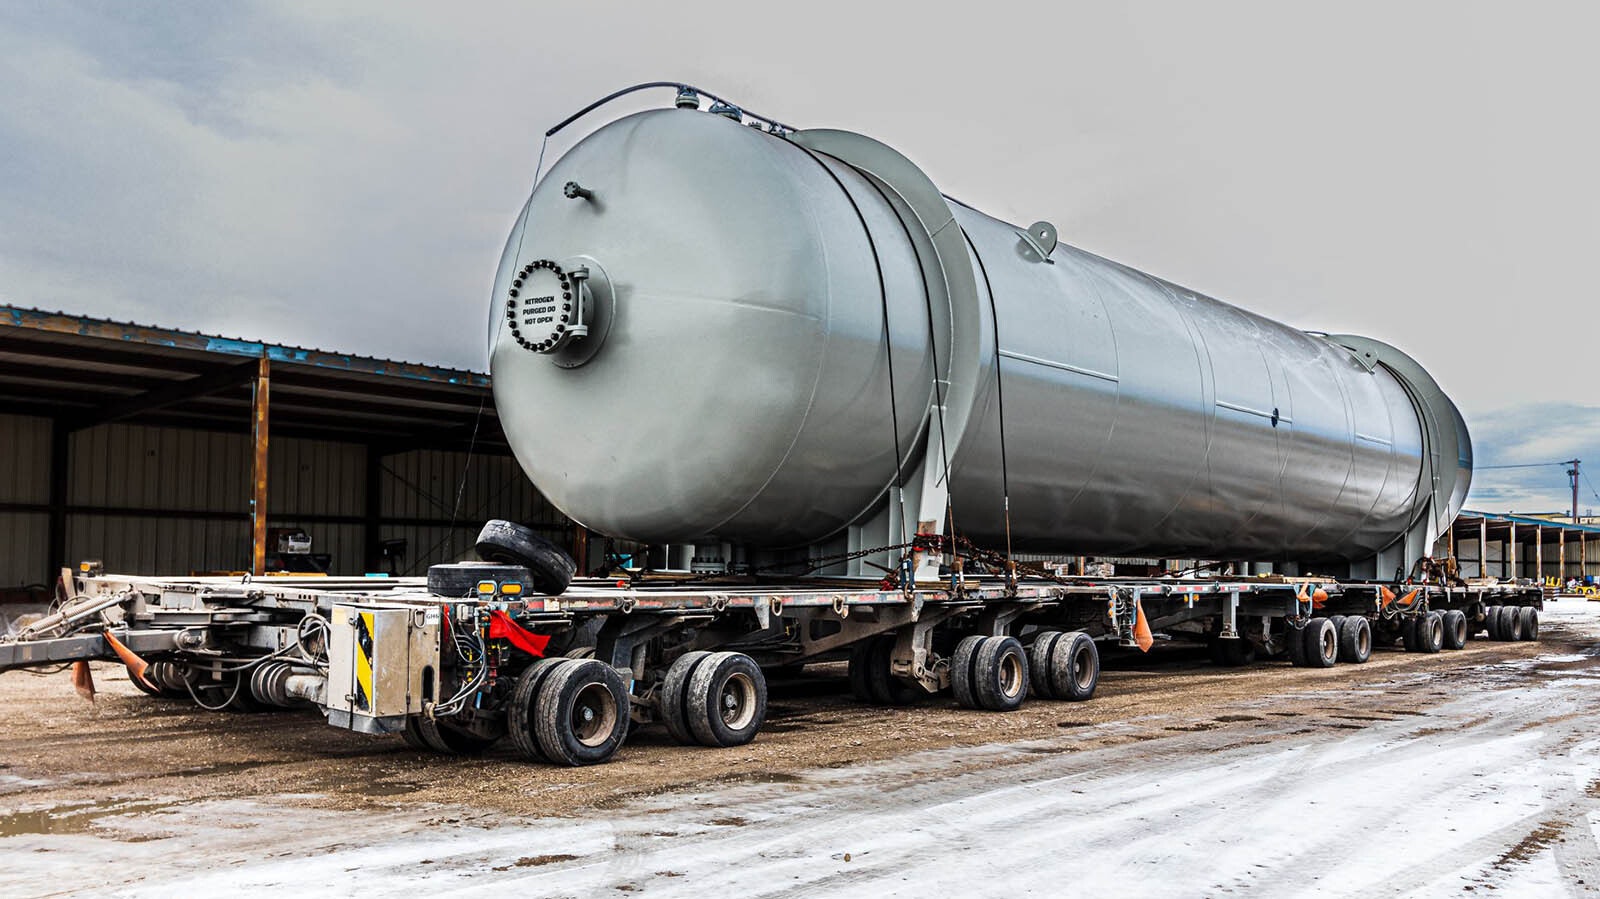 It can take months to work out the logistics of transporting the giant vessels High Country fabricates for customers across the country and world.